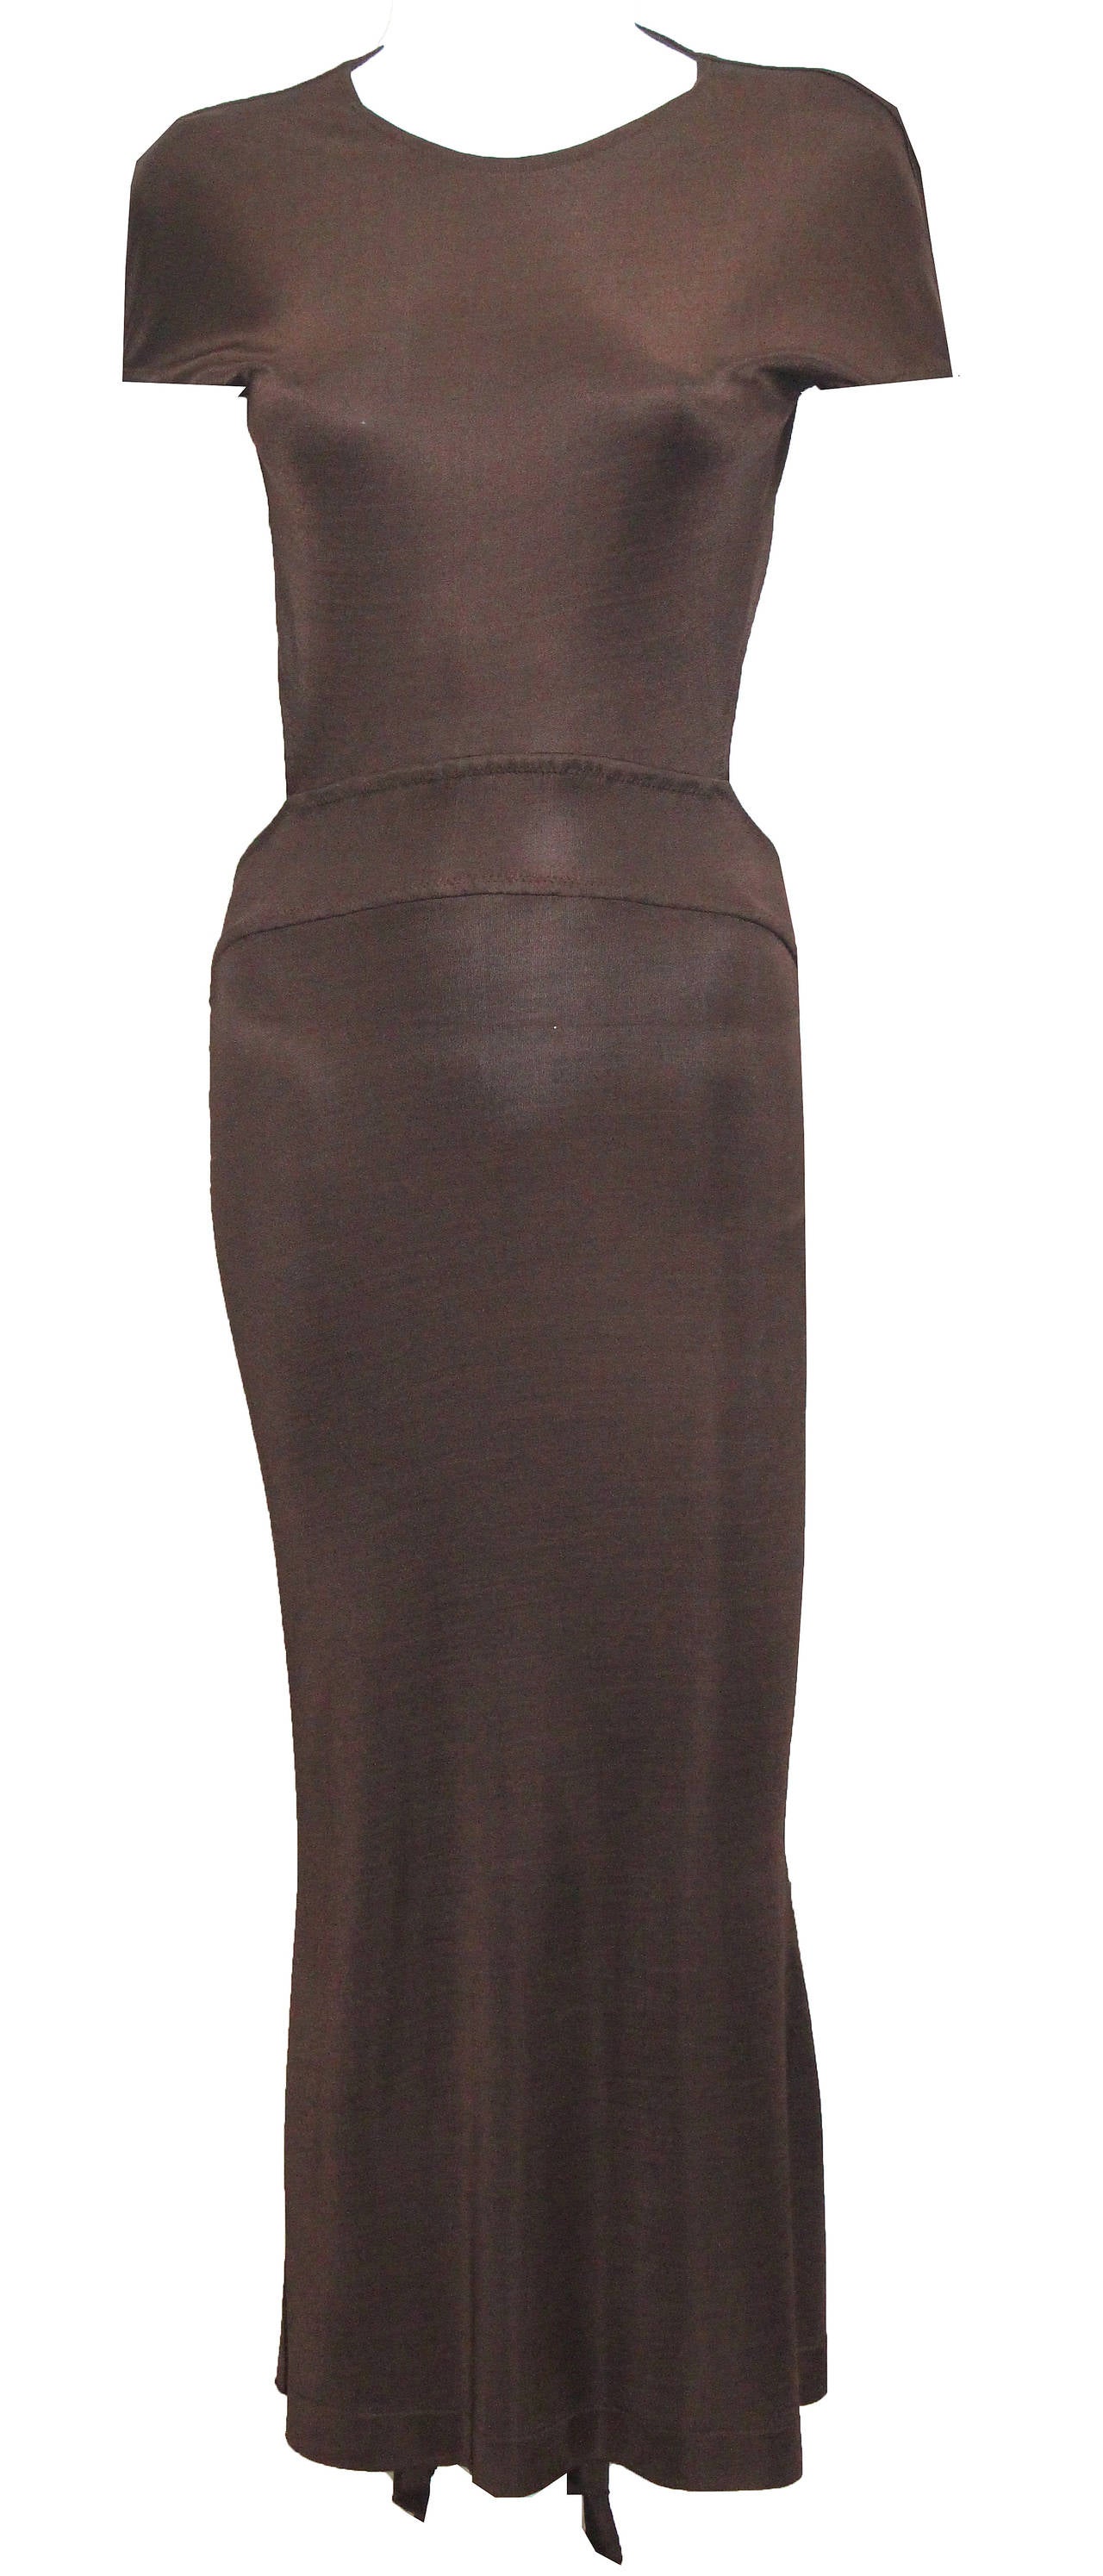 A backless evening gown by Claude Montana in a chocolate brown viscose from the 1980s. The dress has a pleated back tail, cut out back and snap button closure. 

Size Small